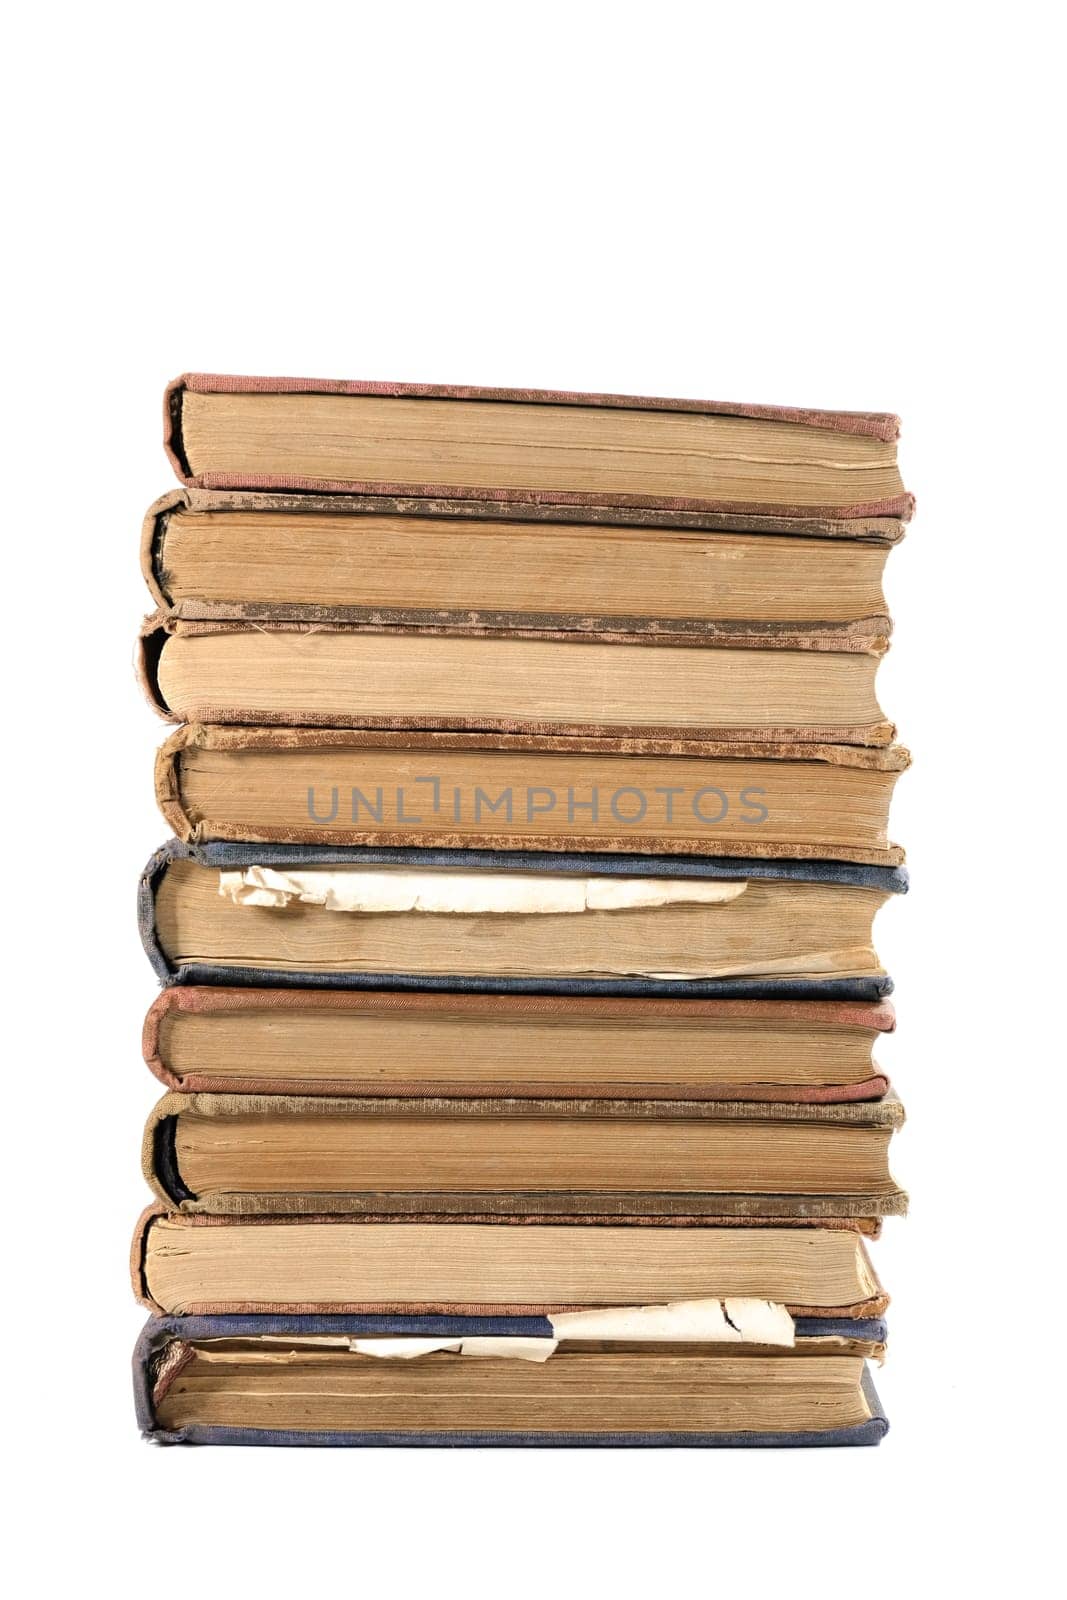 A stack of old books isolated on a white background.